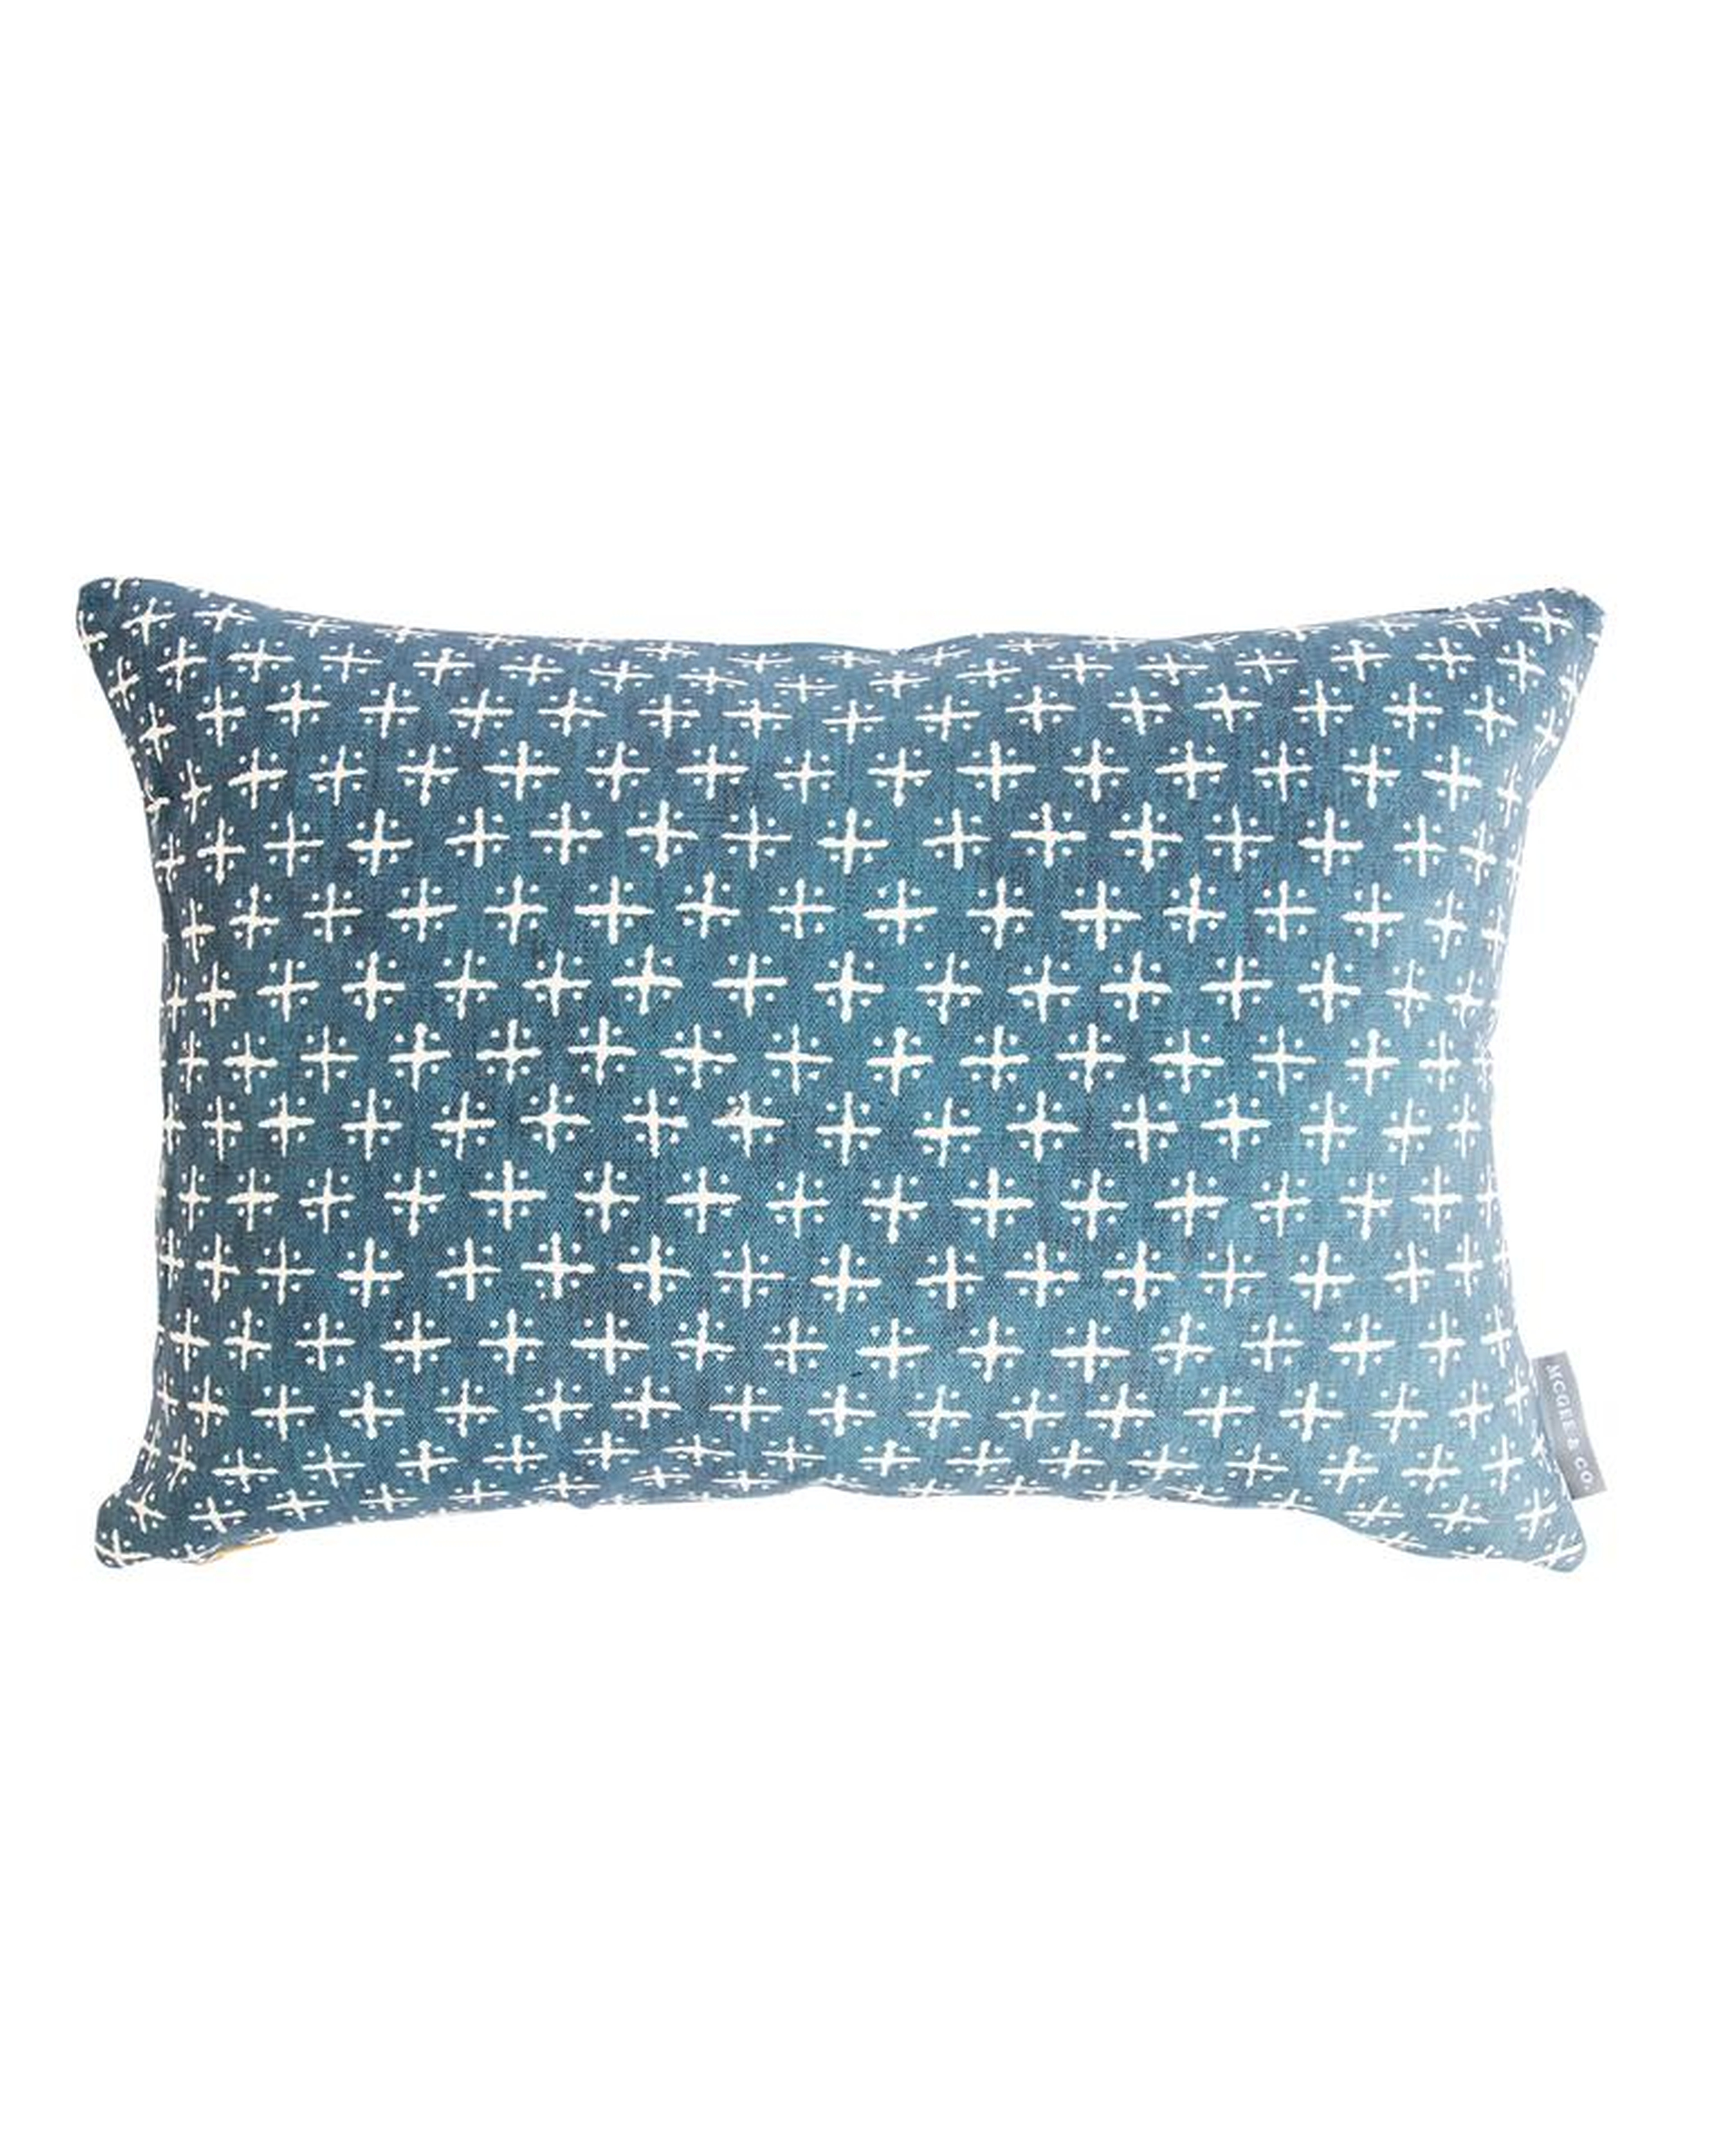 NEWPORT CROSS PILLOW WITHOUT INSERT, 12" x 24" - McGee & Co.